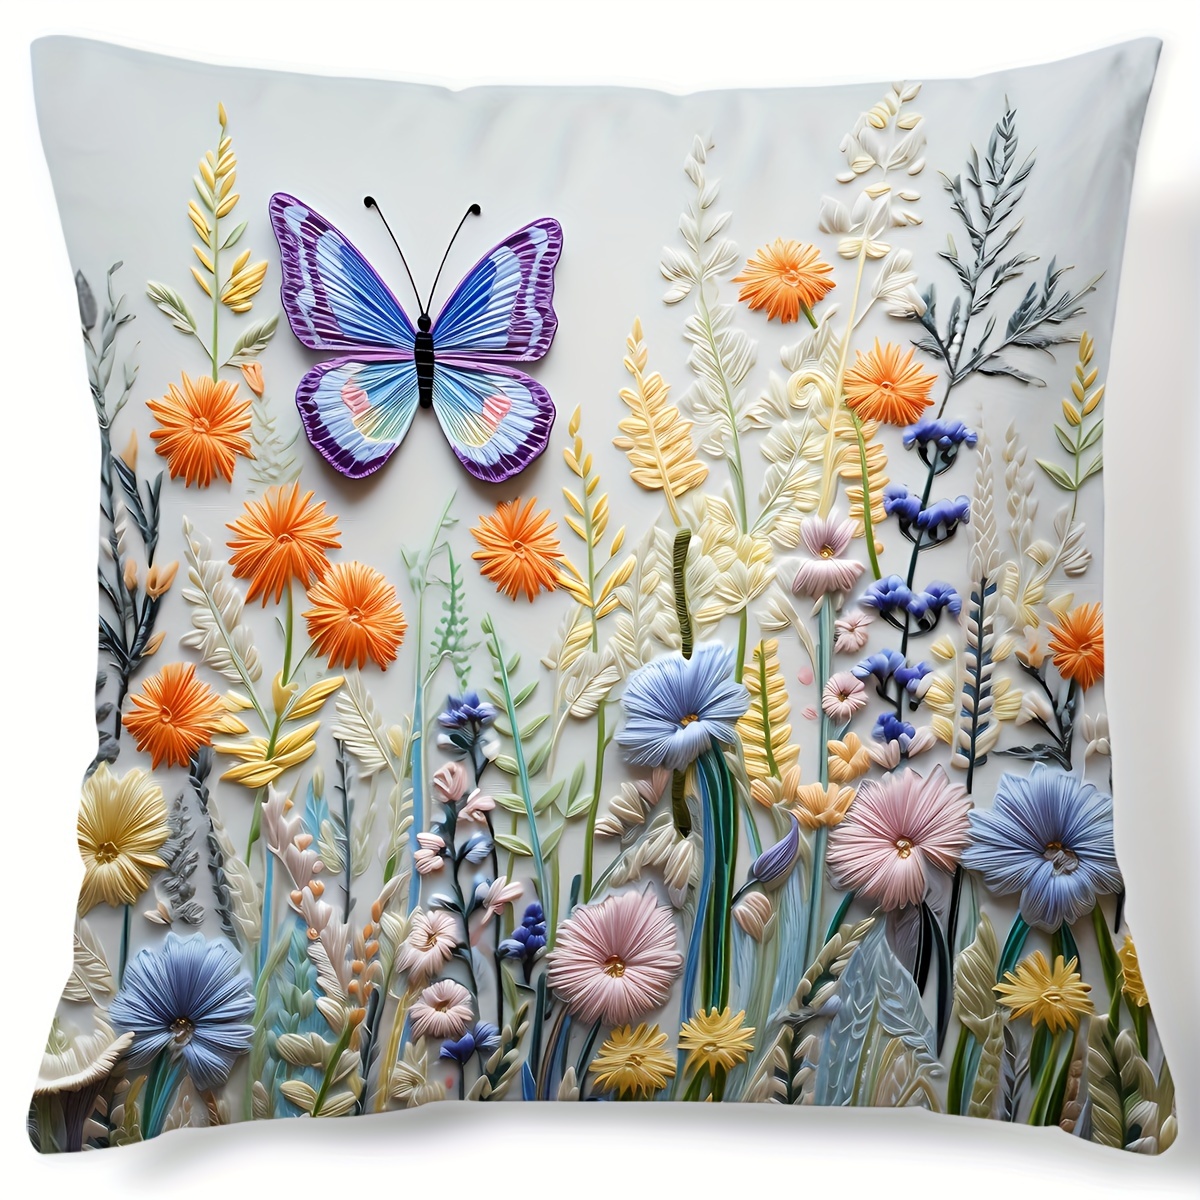 

Contemporary Woven Polyester Throw Pillow Cover 17.7" - Hand Wash Only, Nature-inspired Botanical And Butterfly Print, Zipper Closure - Versatile For Sofa, Living Room, Bedroom Decor (1pc, No Insert)